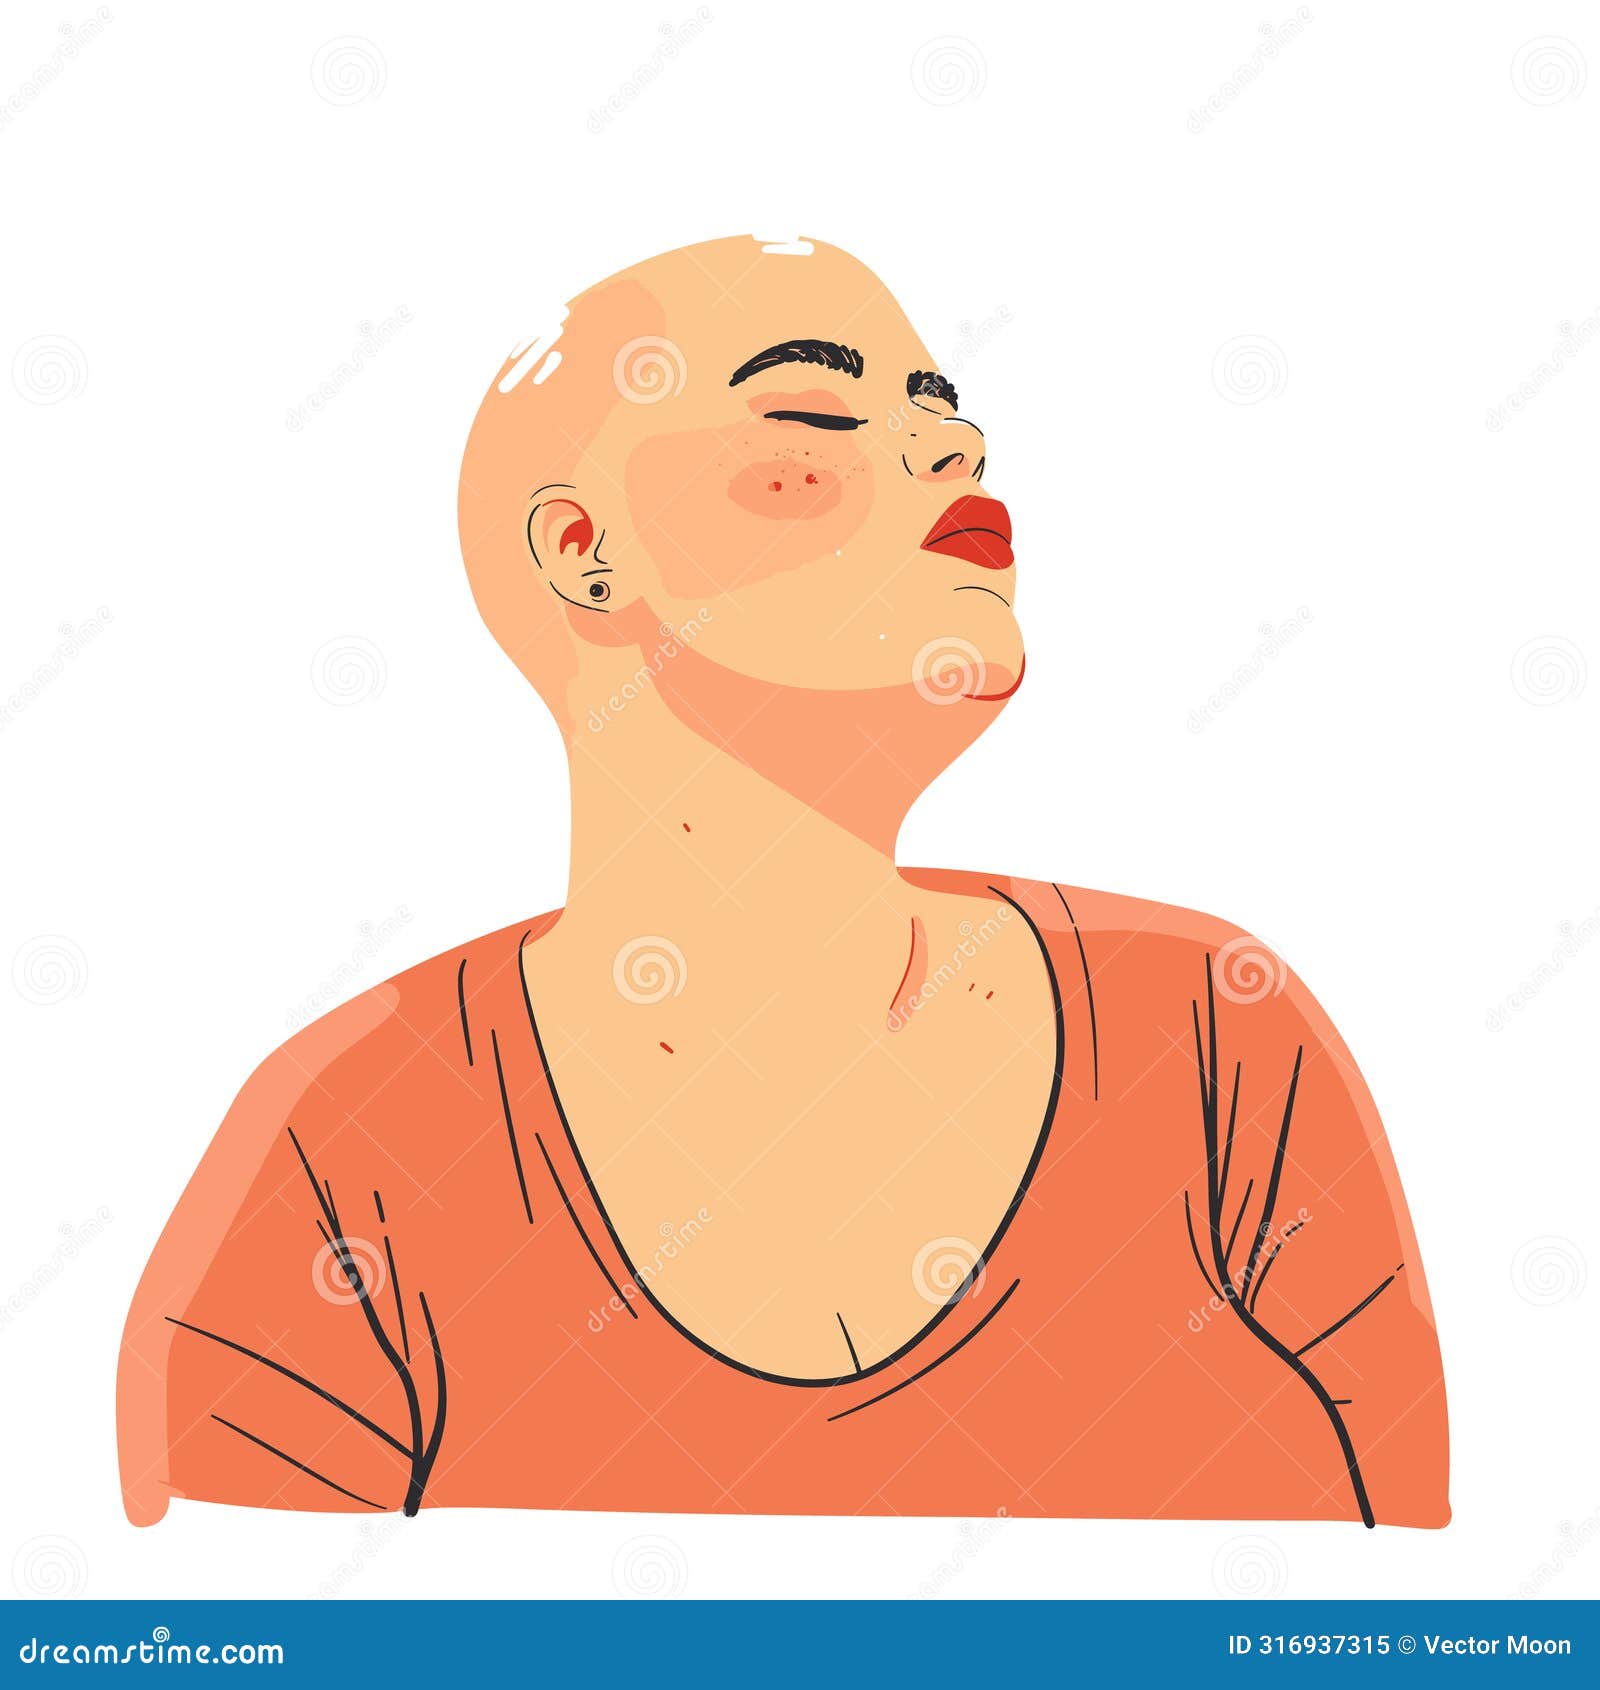 bald woman confidently looking up, eyes closed, serene expression. head slightly tilted back